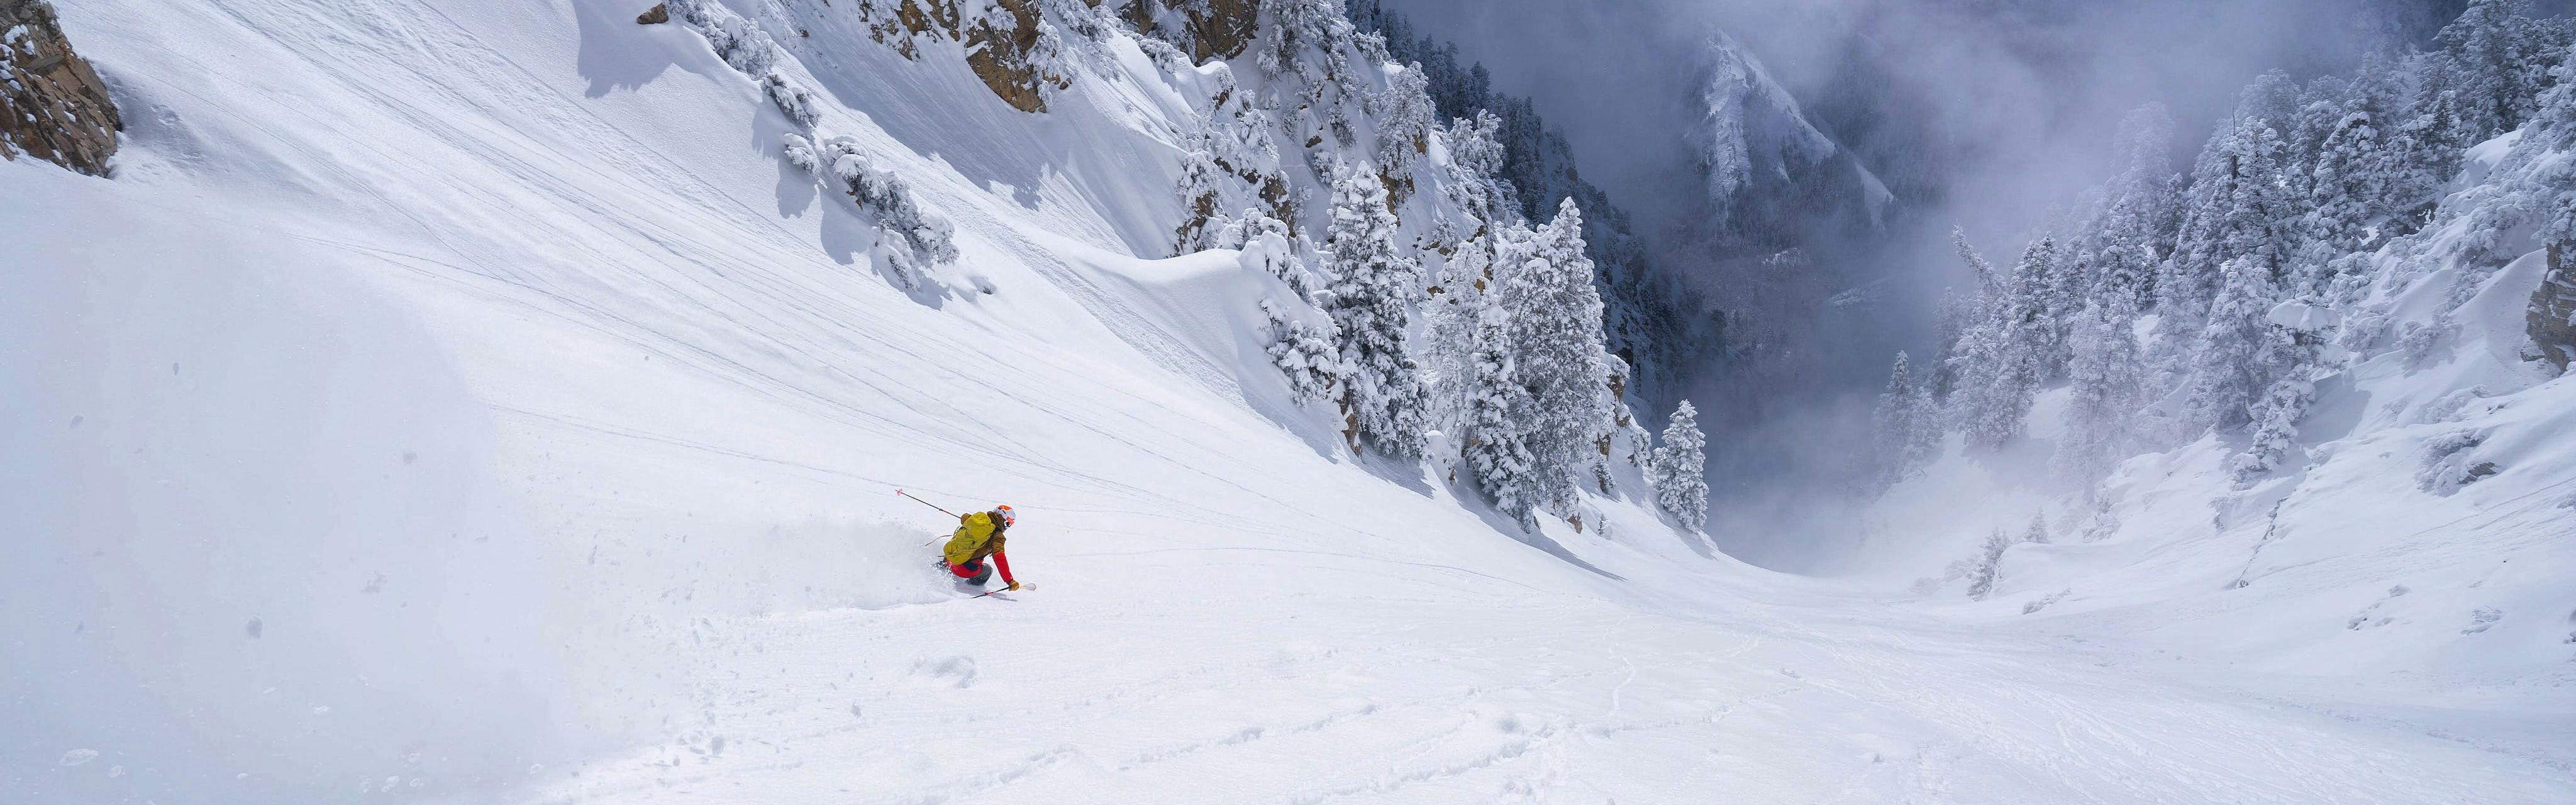 A skier skis down a wide open mountain face with a lot of snow.